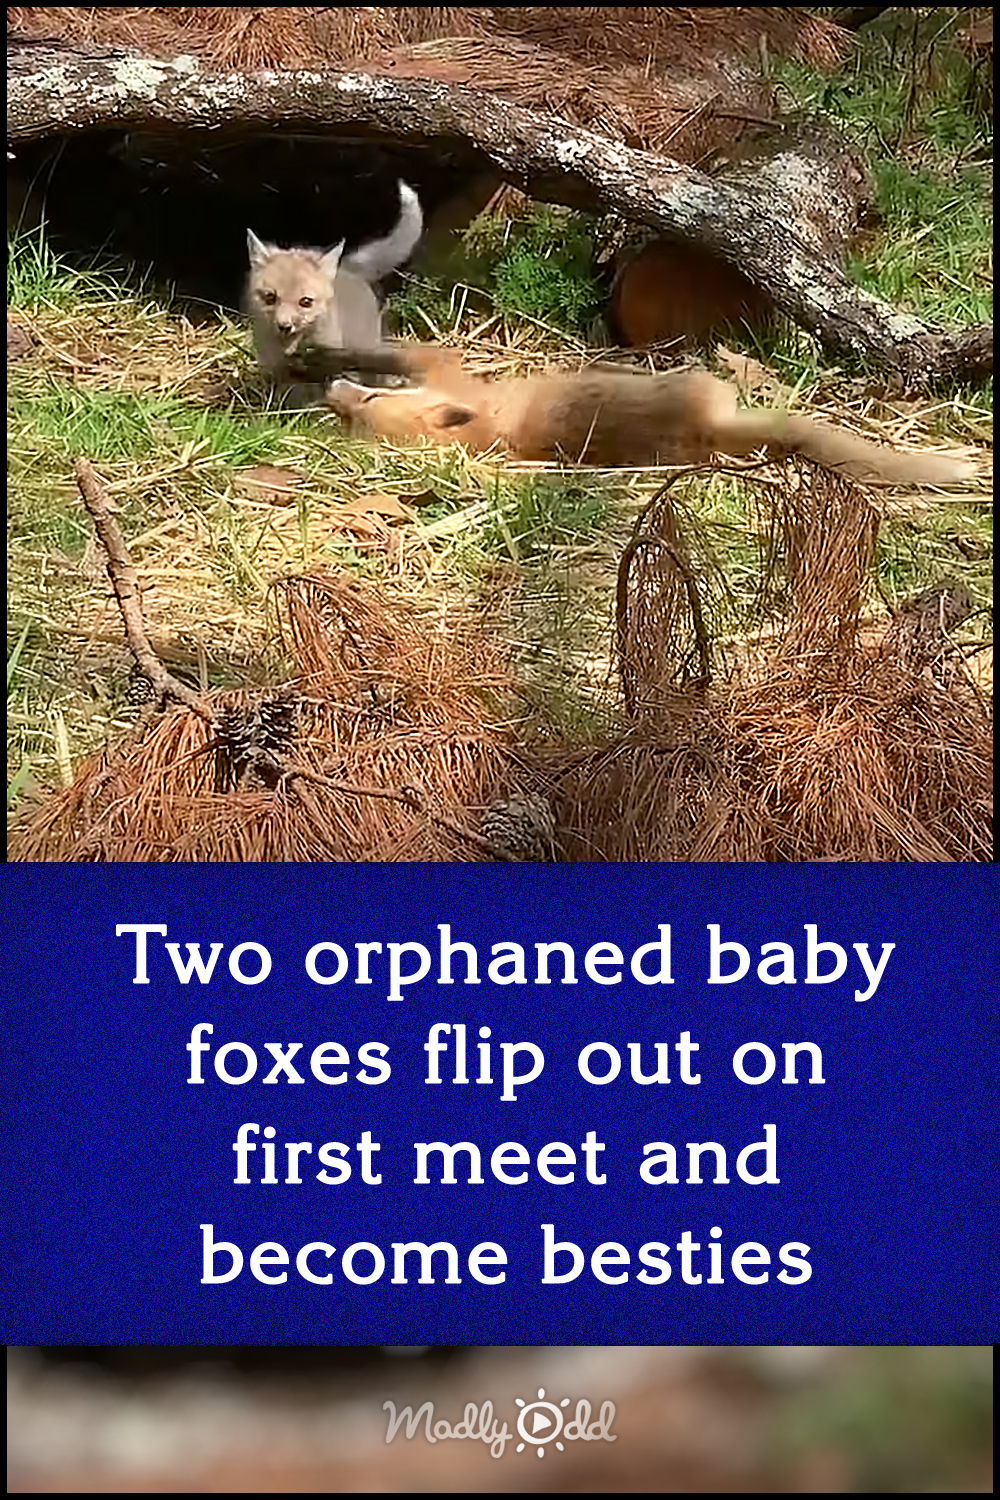 Two orphaned baby foxes flip out on first meet and become besties